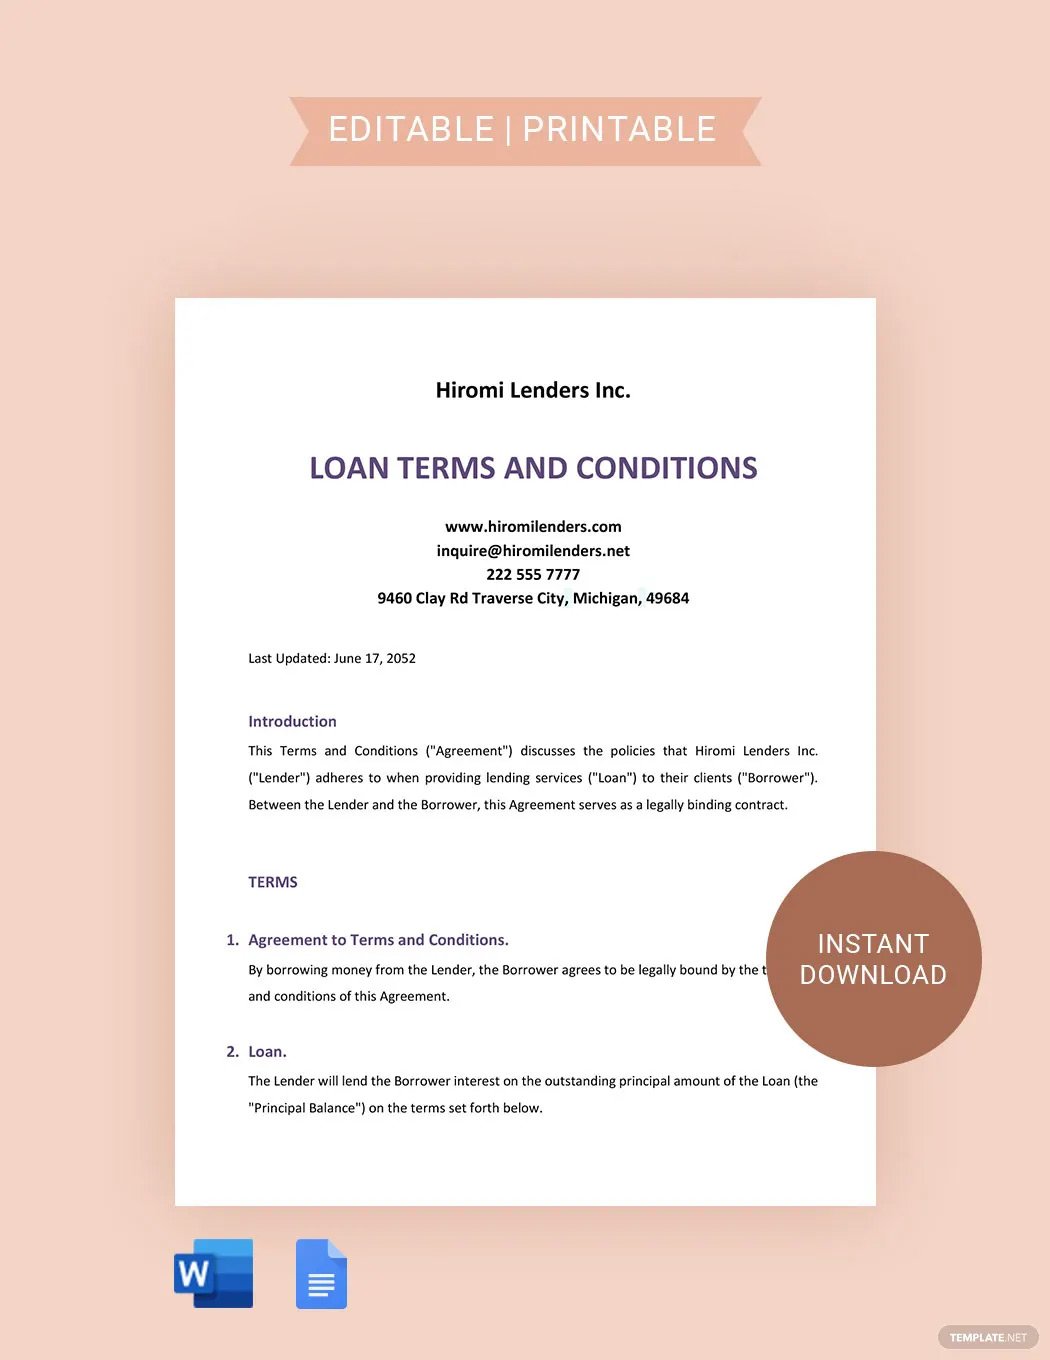 Loan Terms And Conditions Template in Word, Google Docs